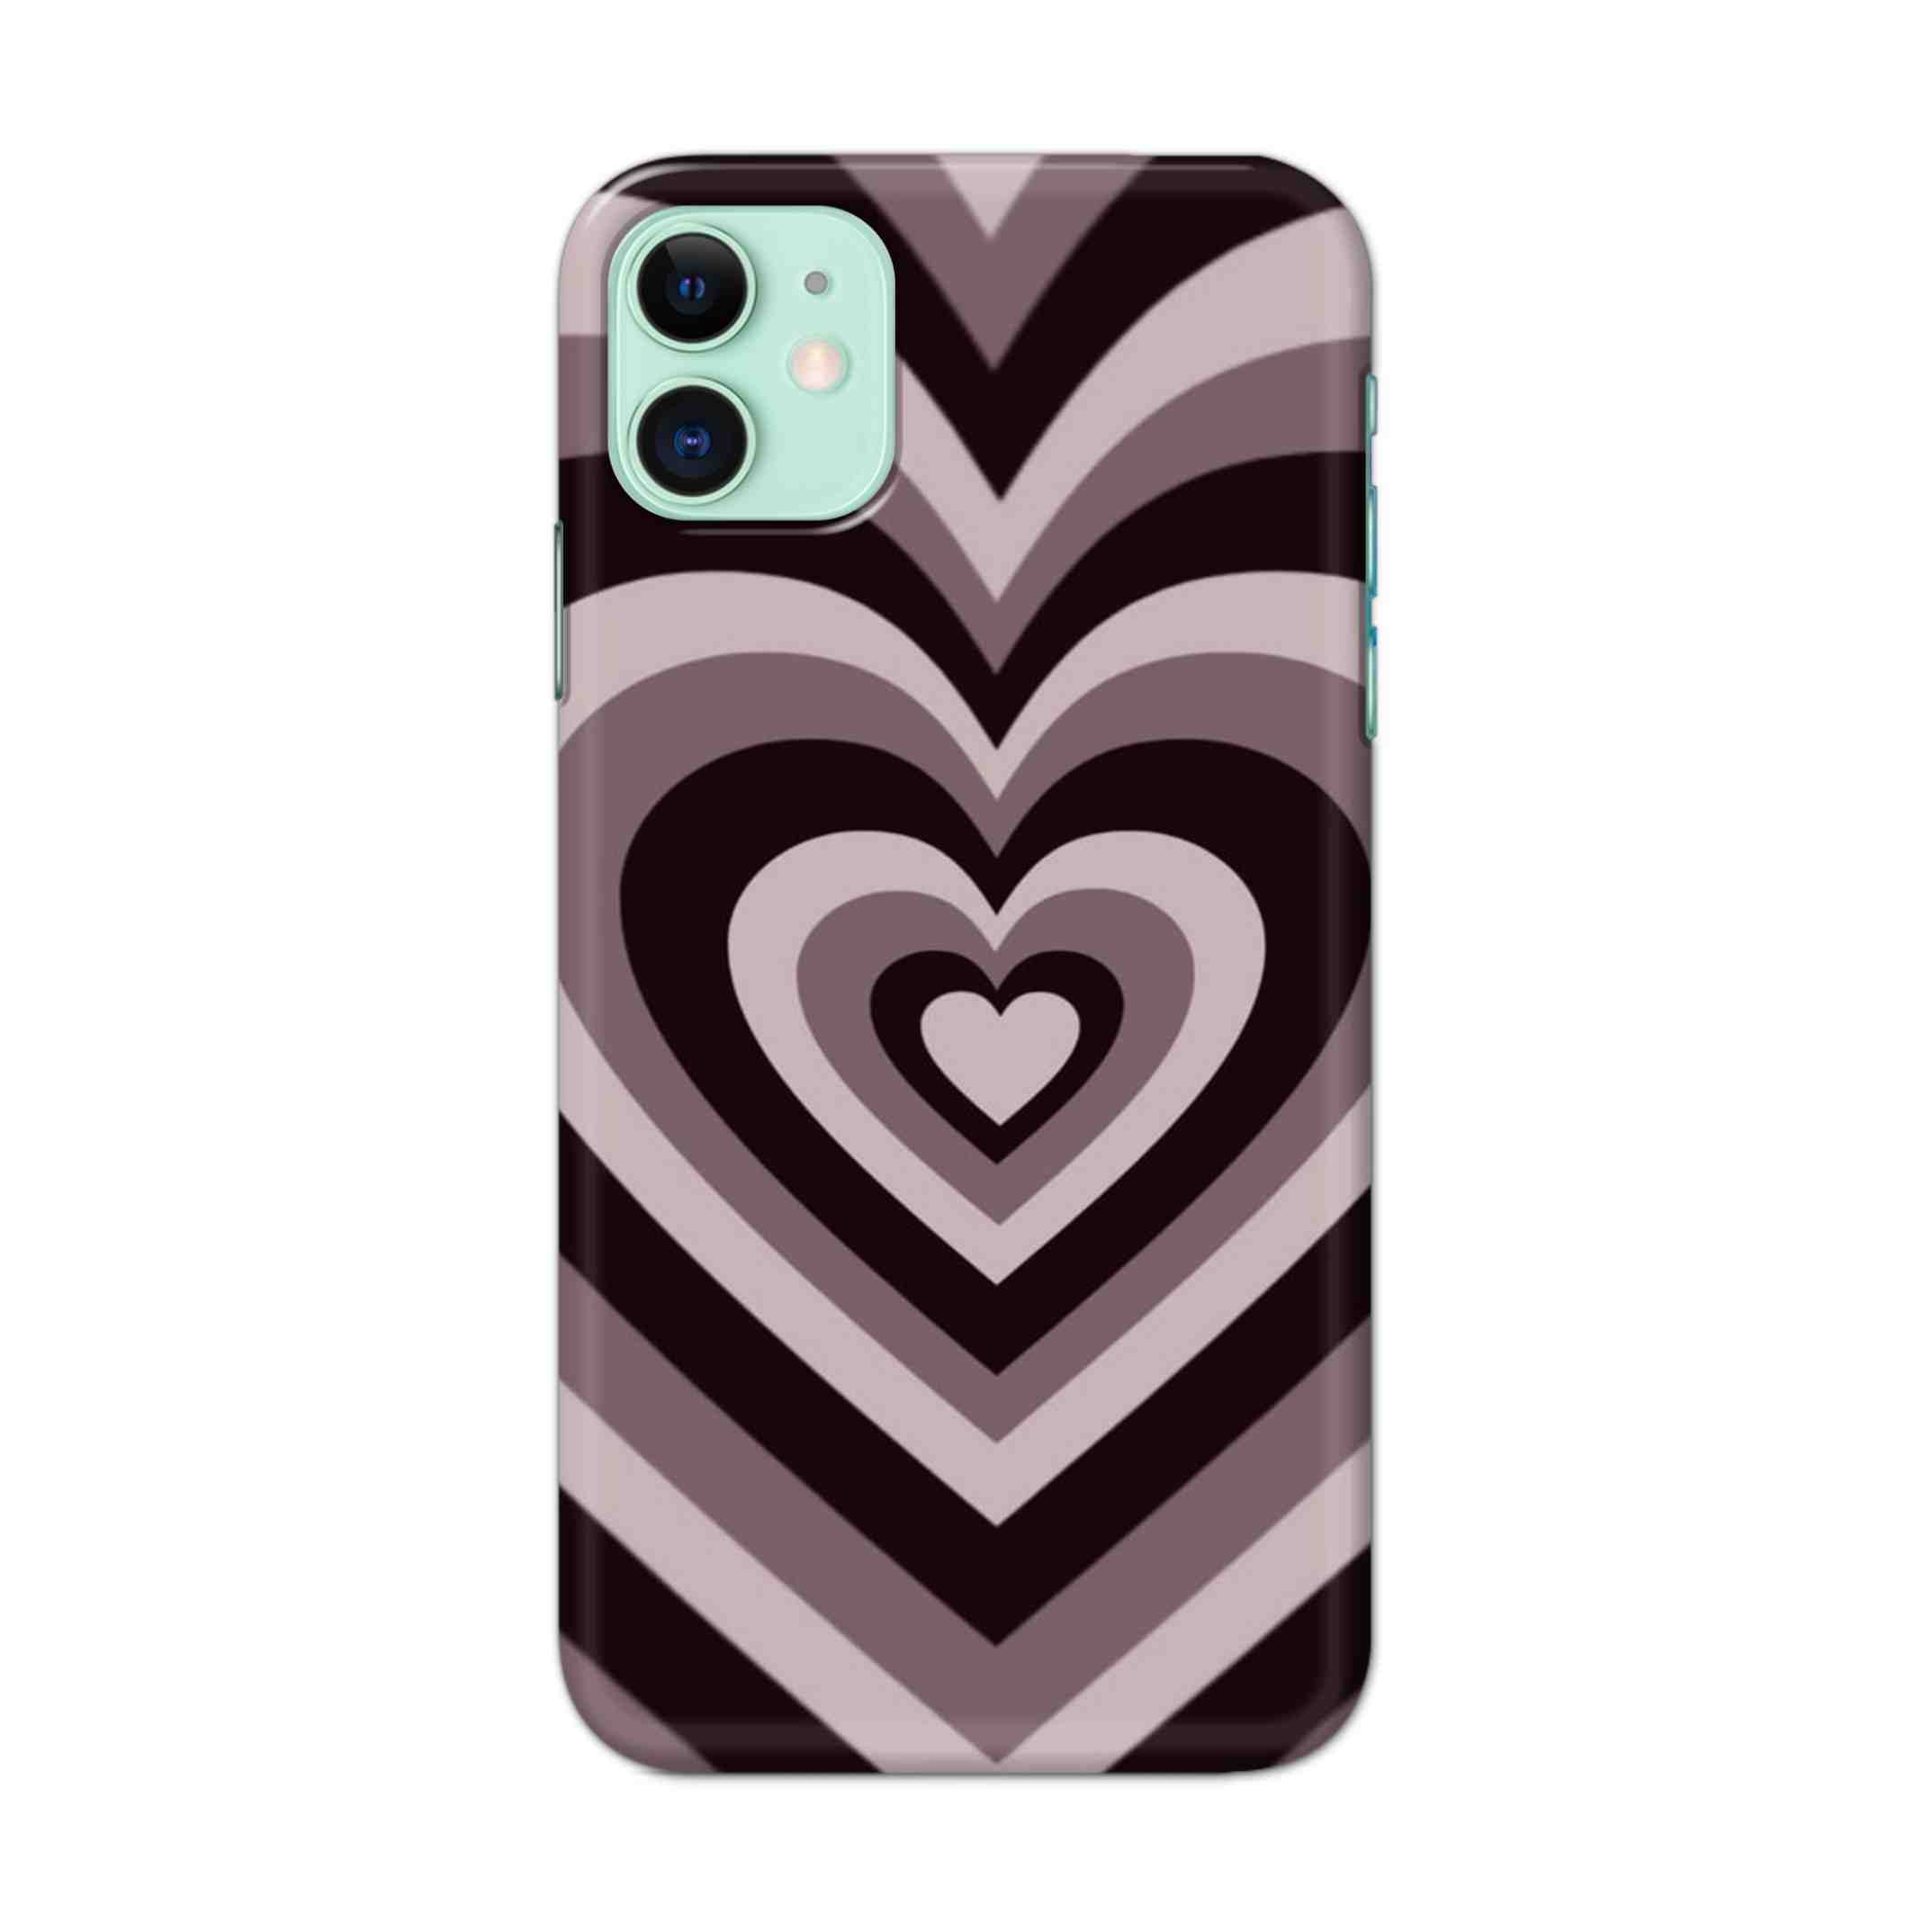 Buy Black Brown Heart Hard Back Mobile Phone Case Cover For iPhone 11 Online